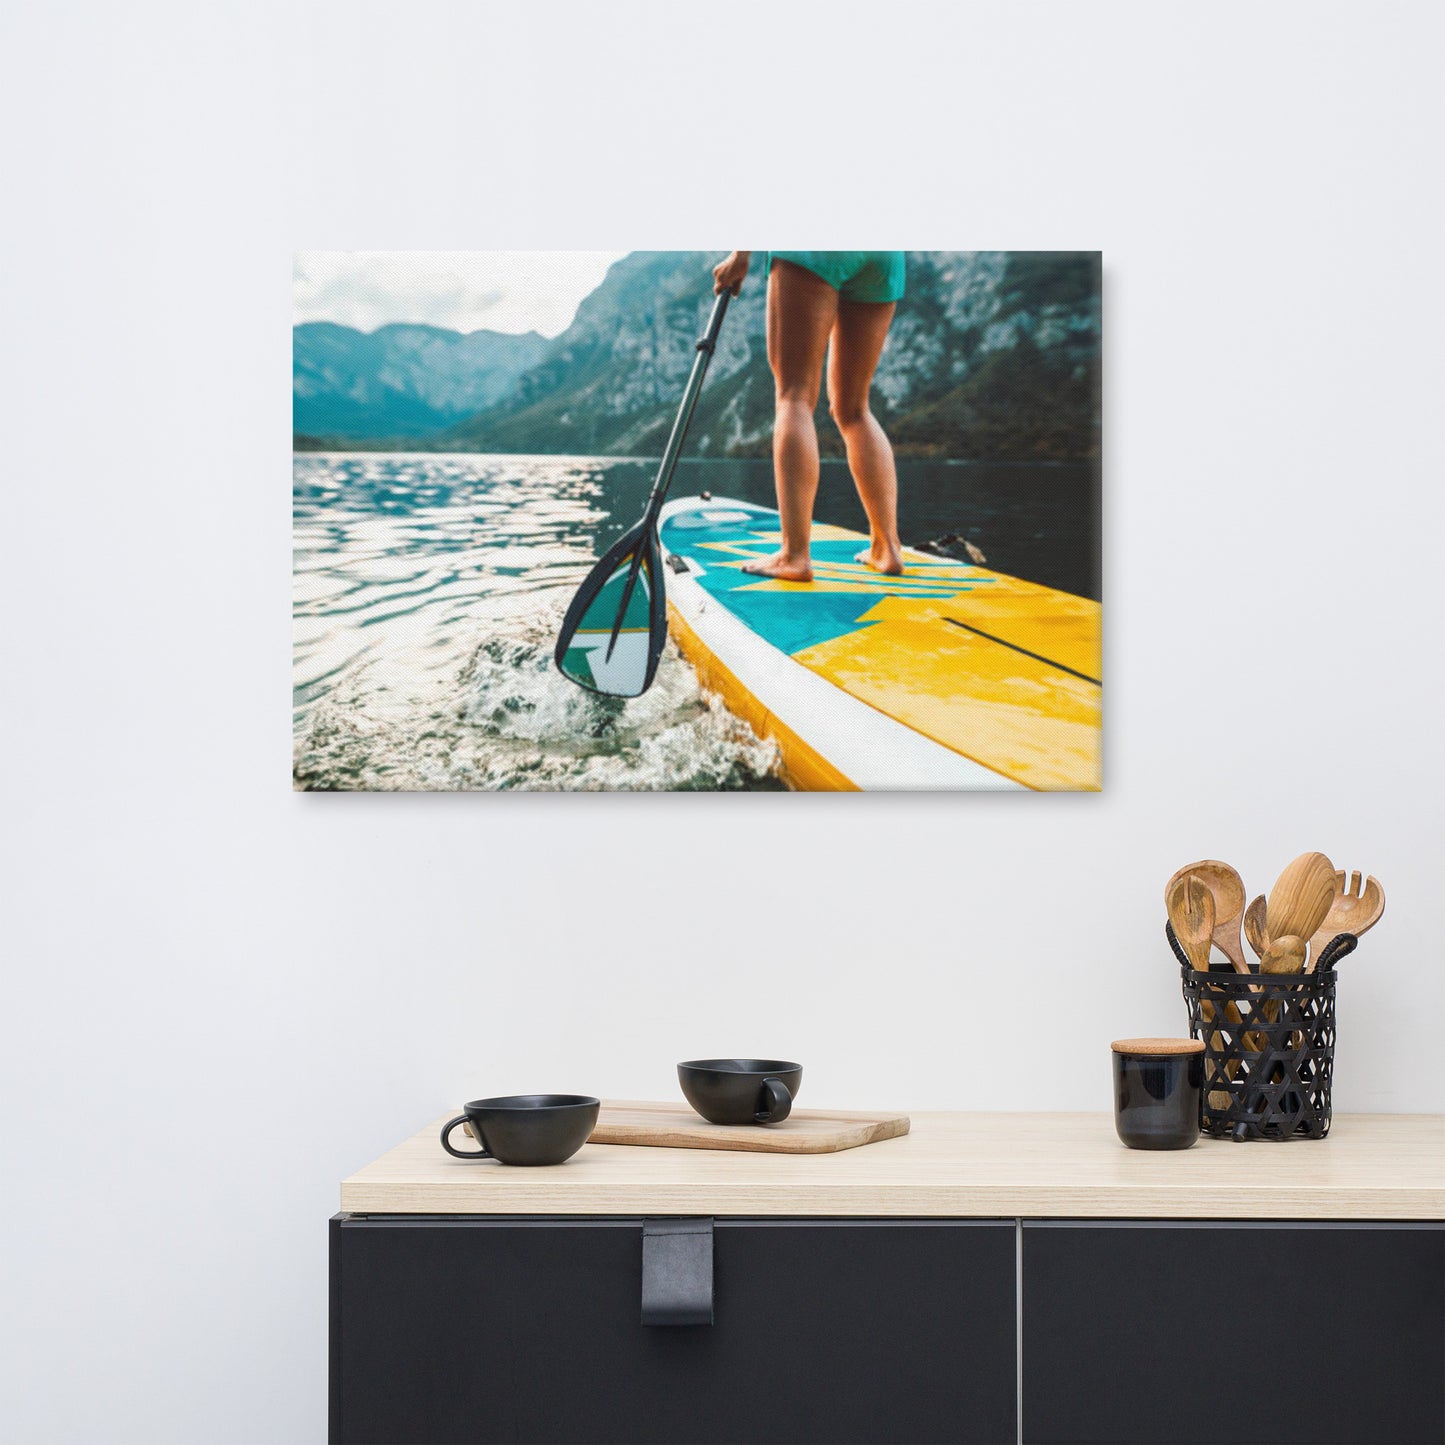 A Moment of Solitude Lifestyle Photograph Canvas Wall Art Print